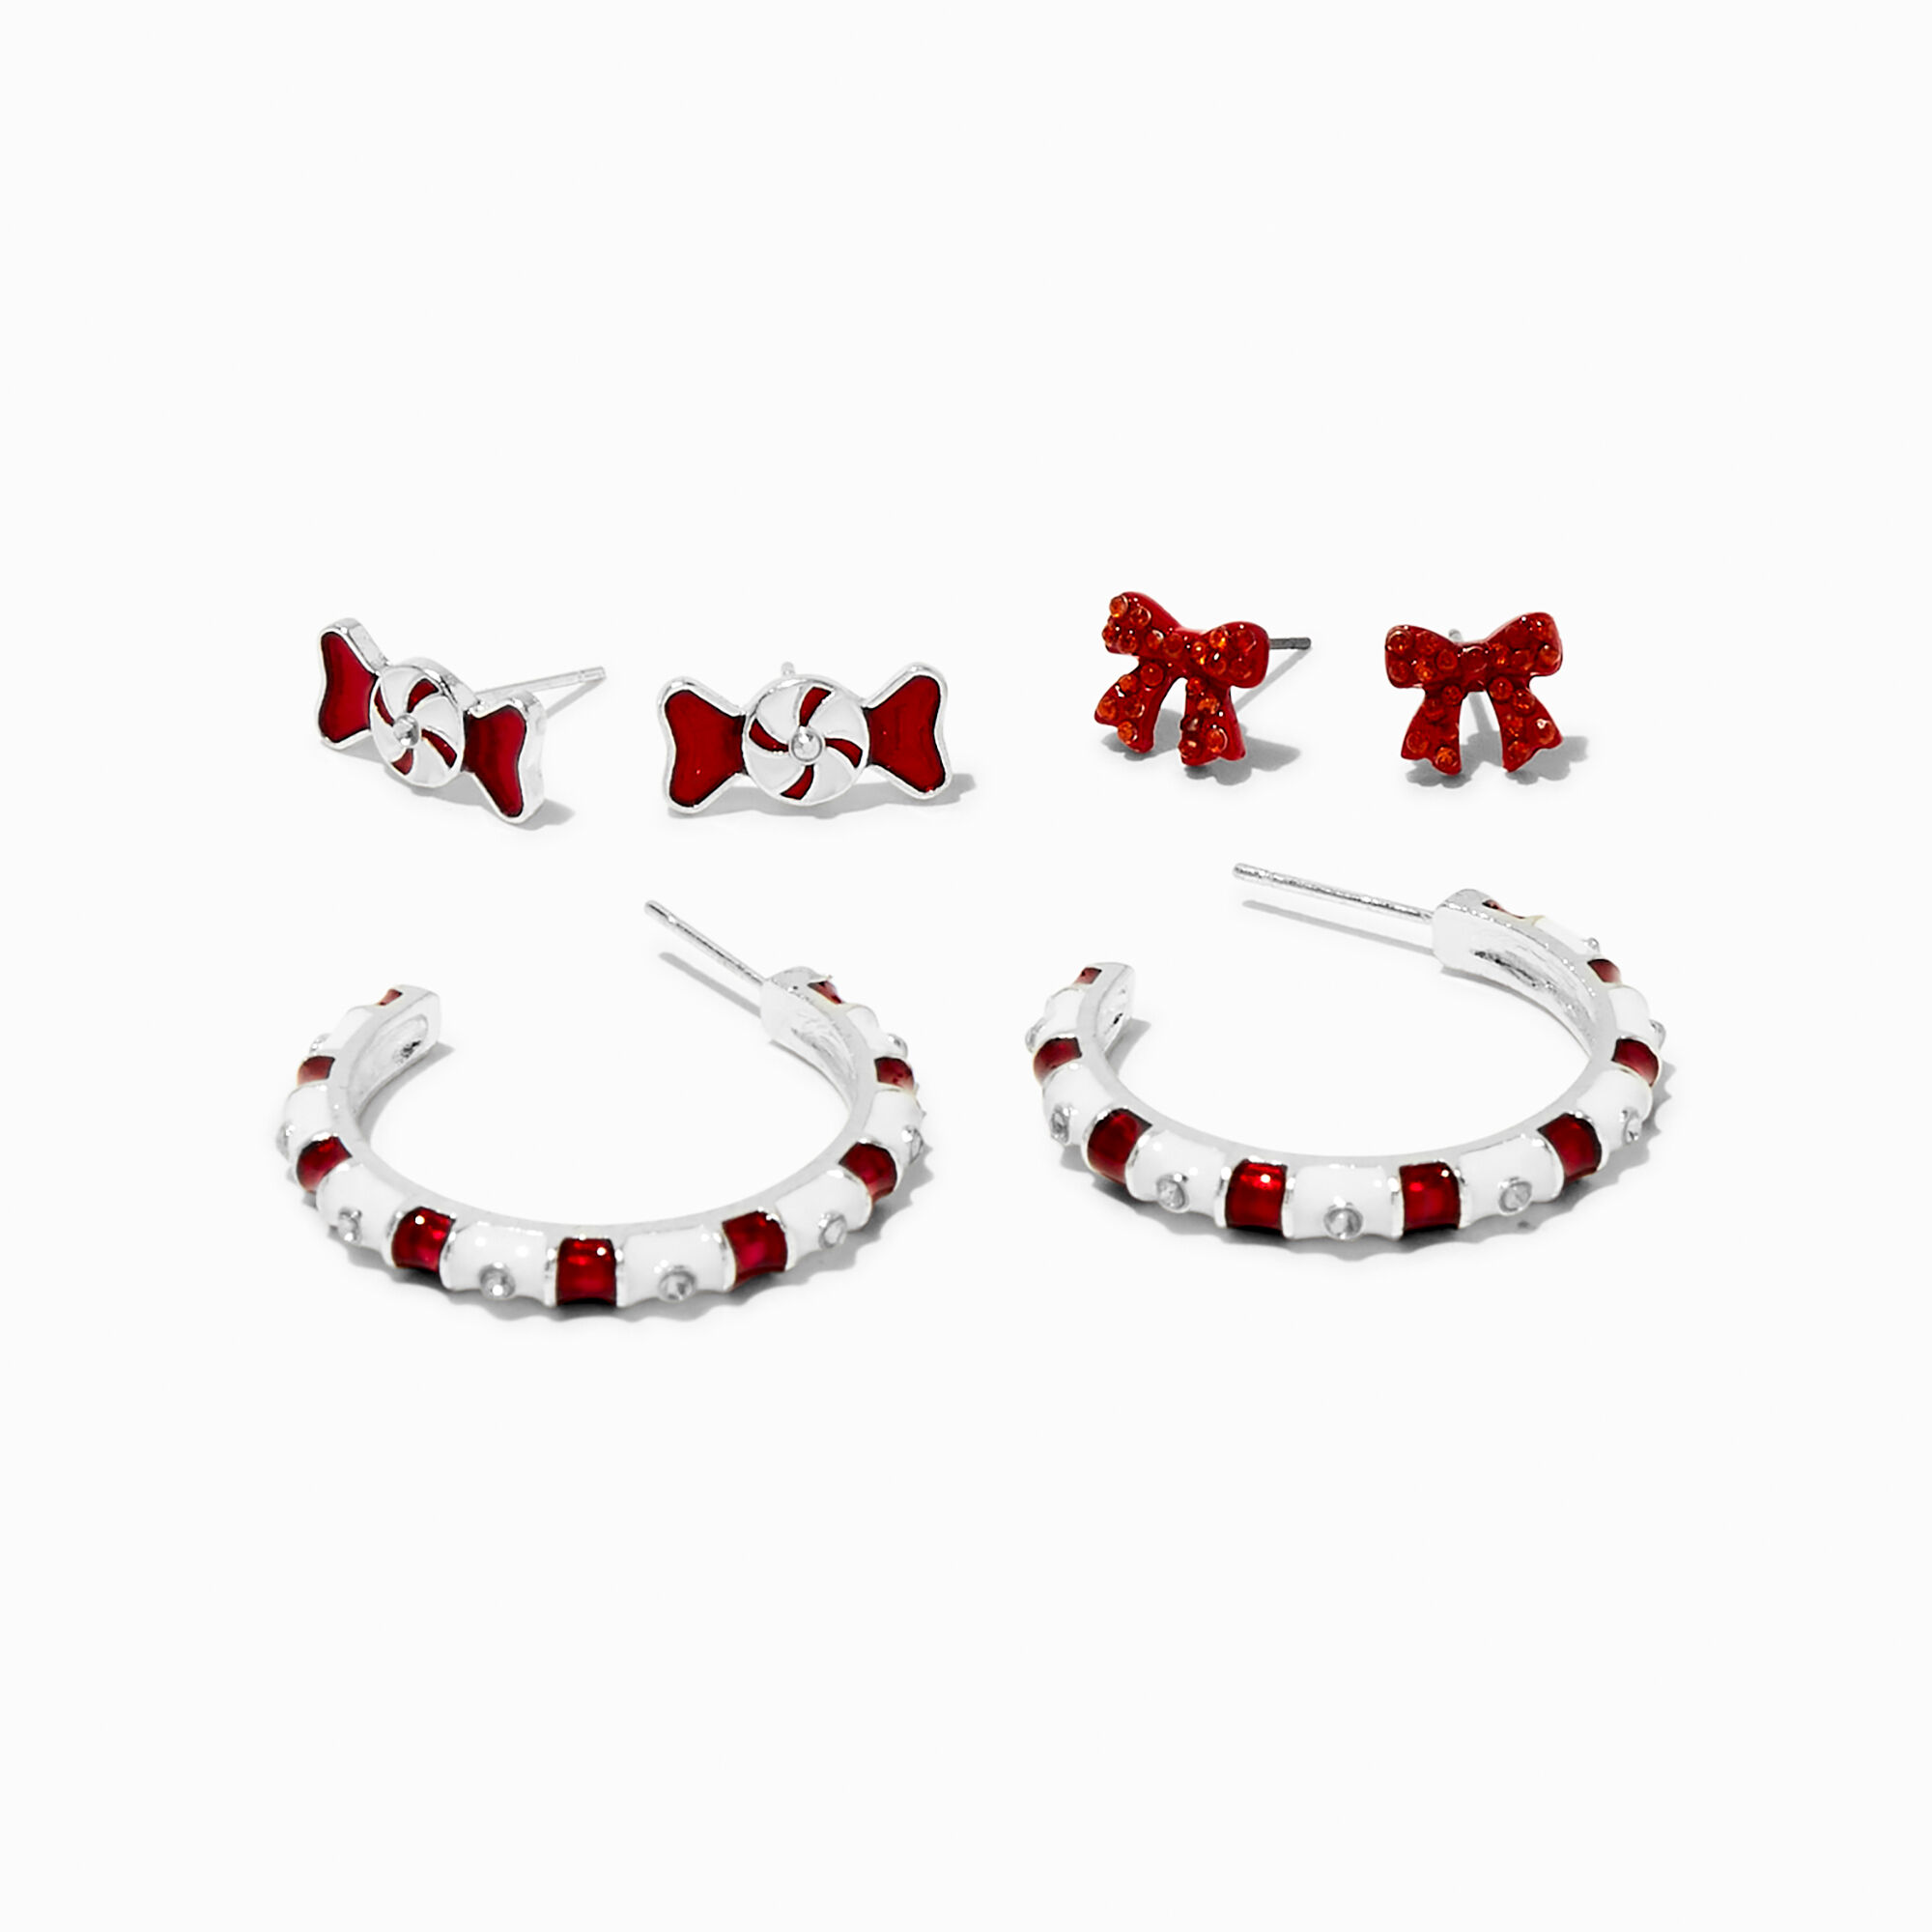 View Claires Peppermint Candy Bows Earring Set 3 Pack Red information